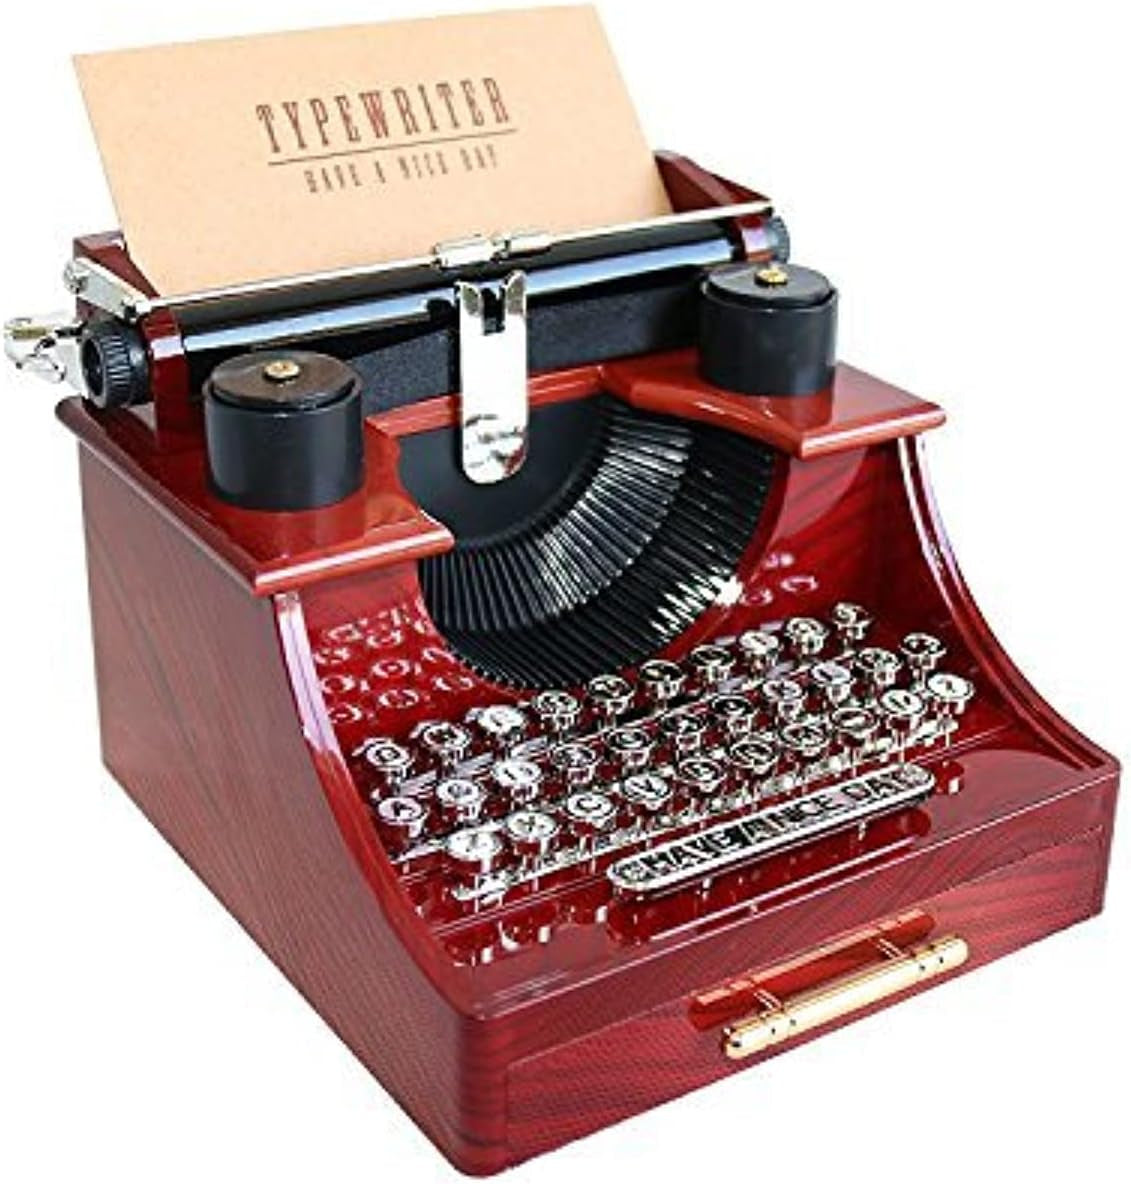 Vintage Typewriter Music Box for Home/Office/Study Room Décor Decoration